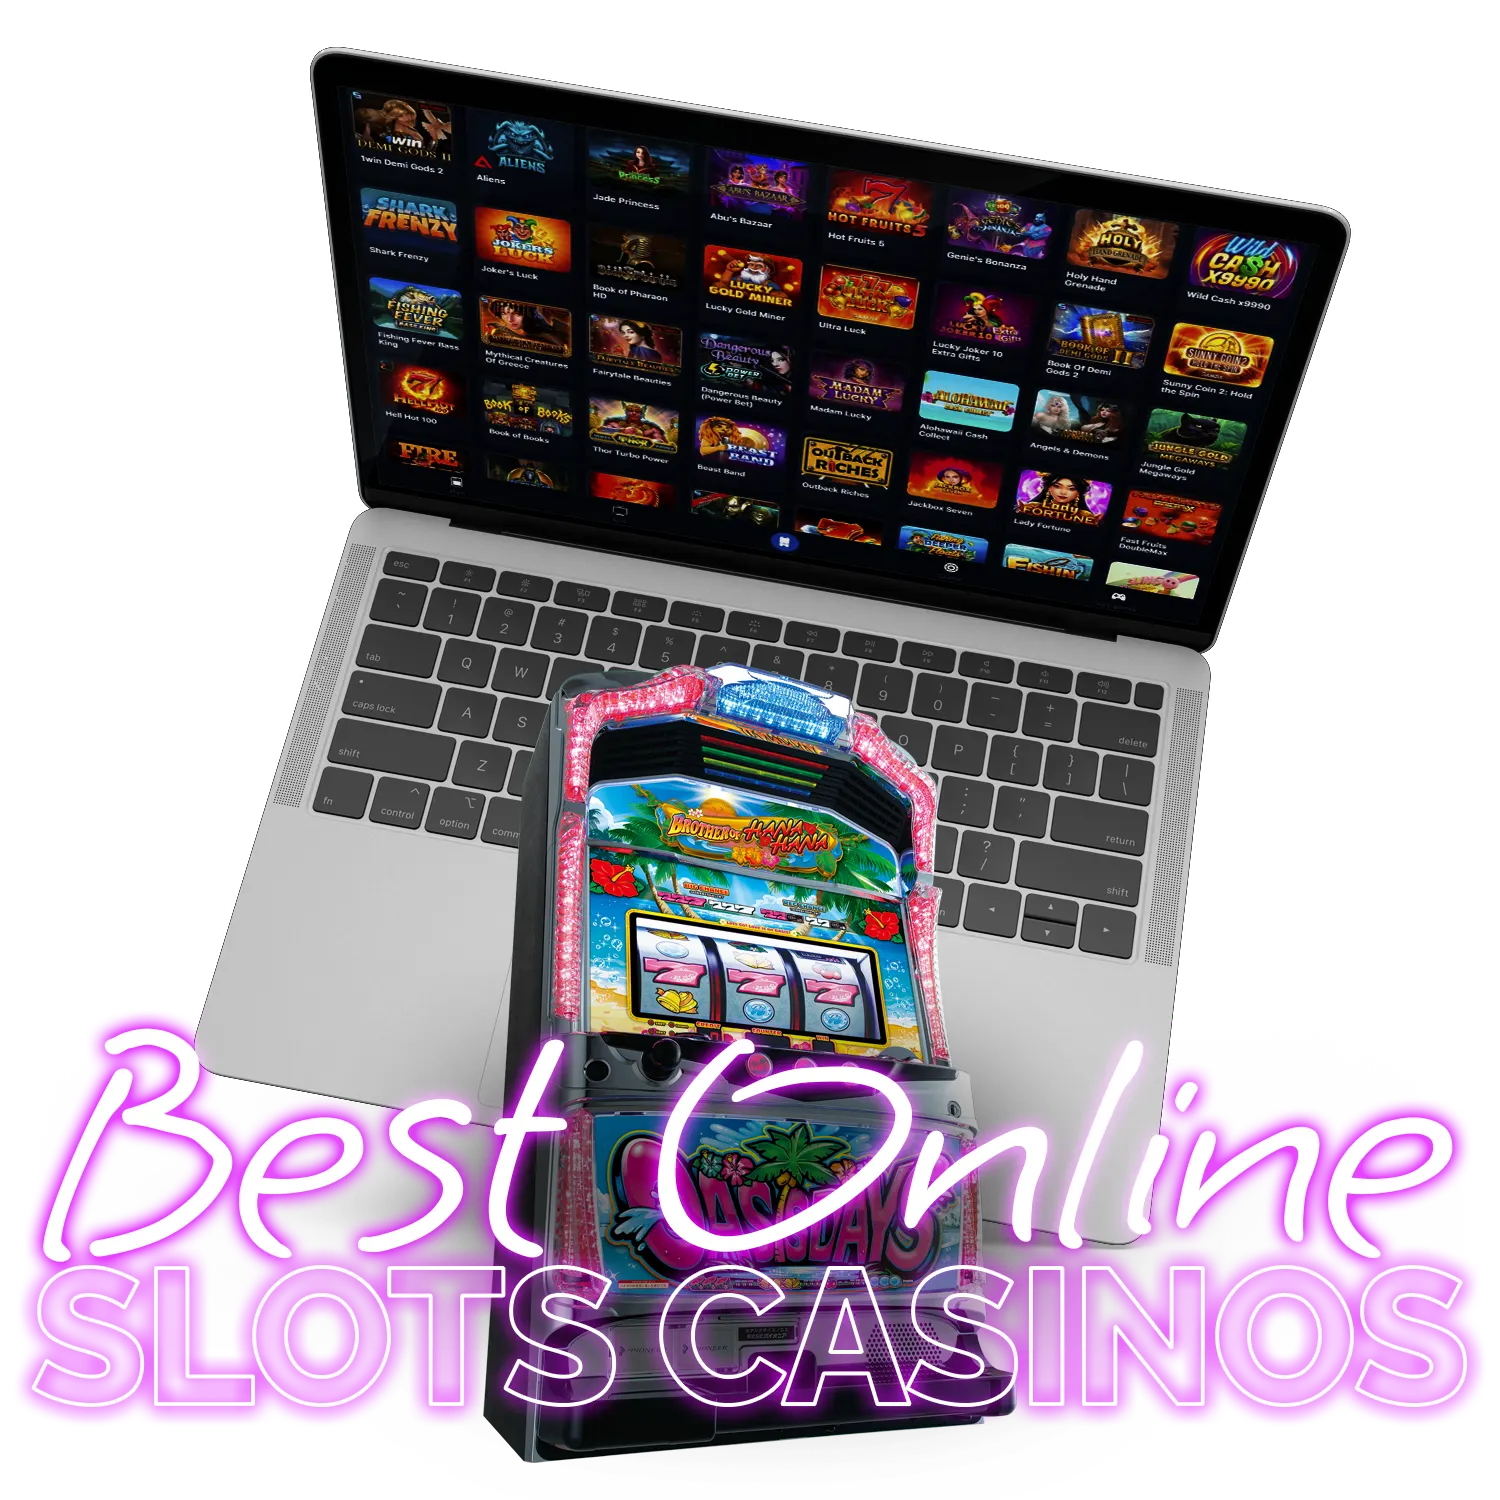 On Bestslots play the best slot machines, get to know the casinos rating.